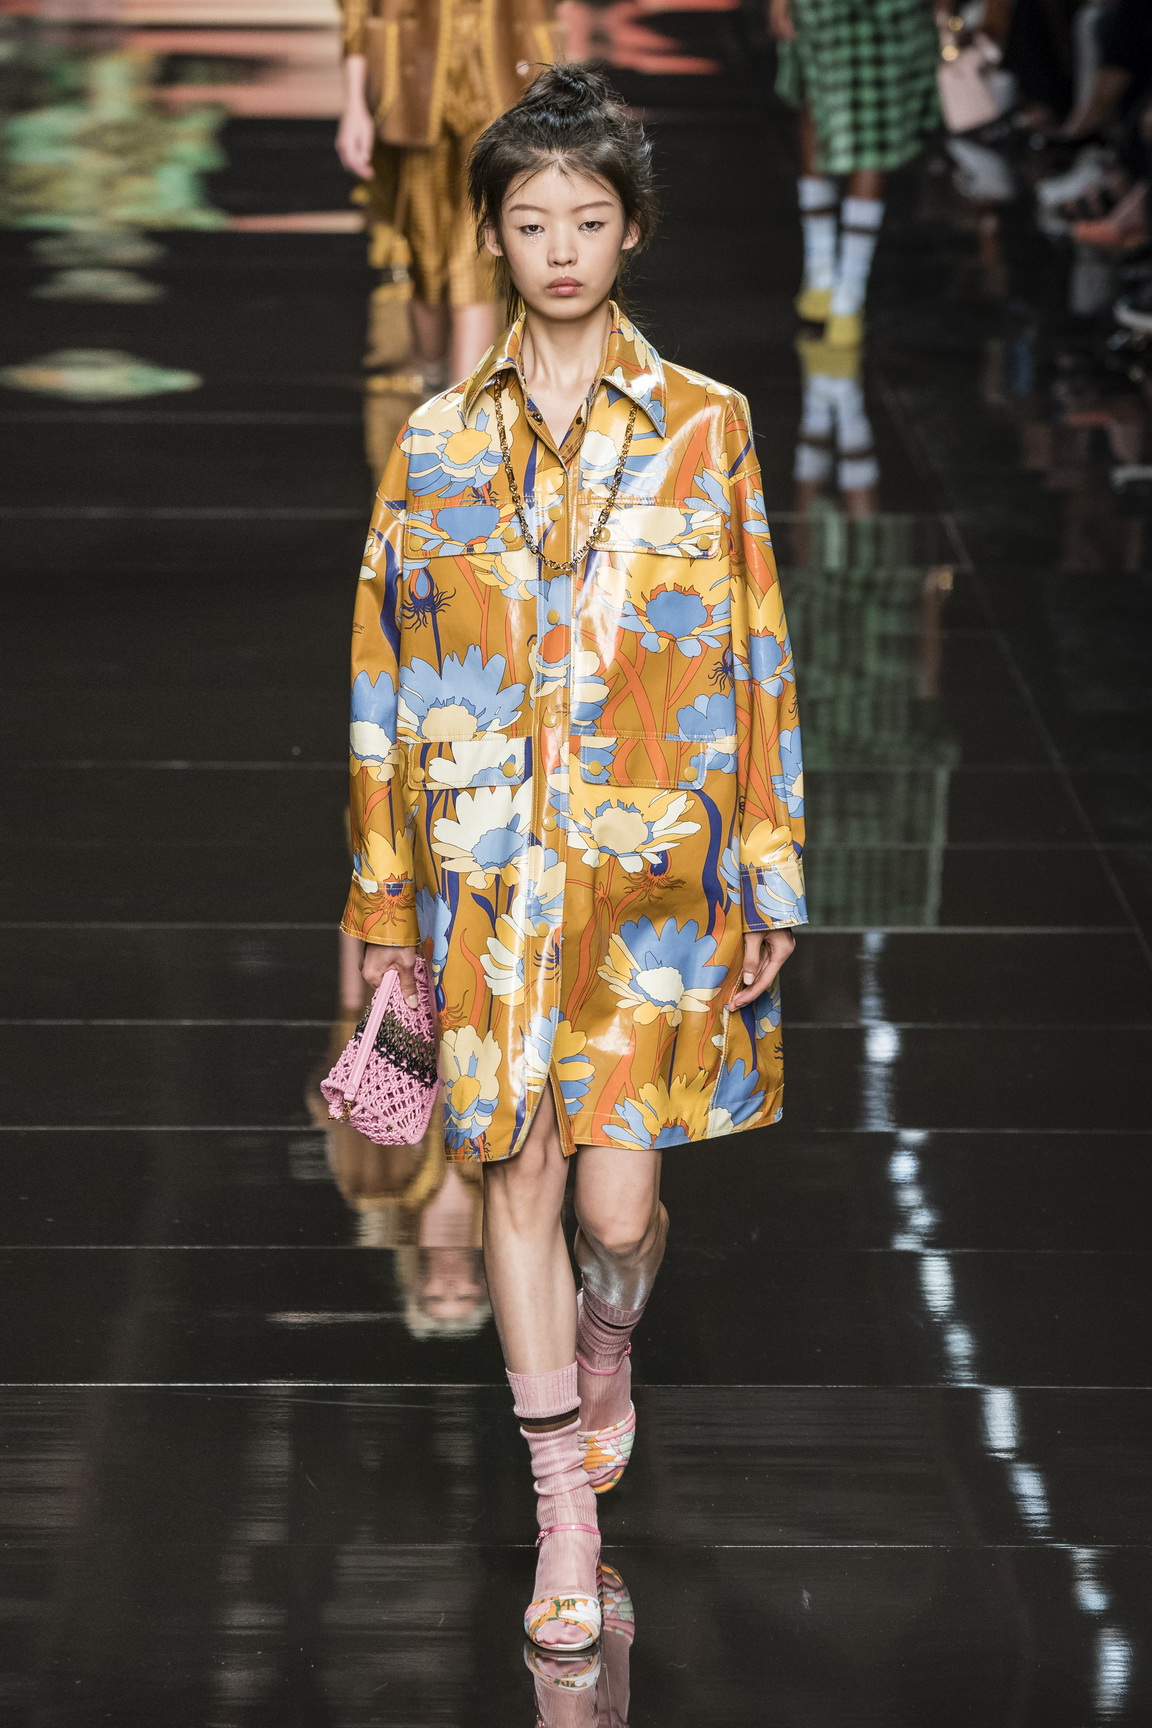 Fendi SS20 catwalk show review and 